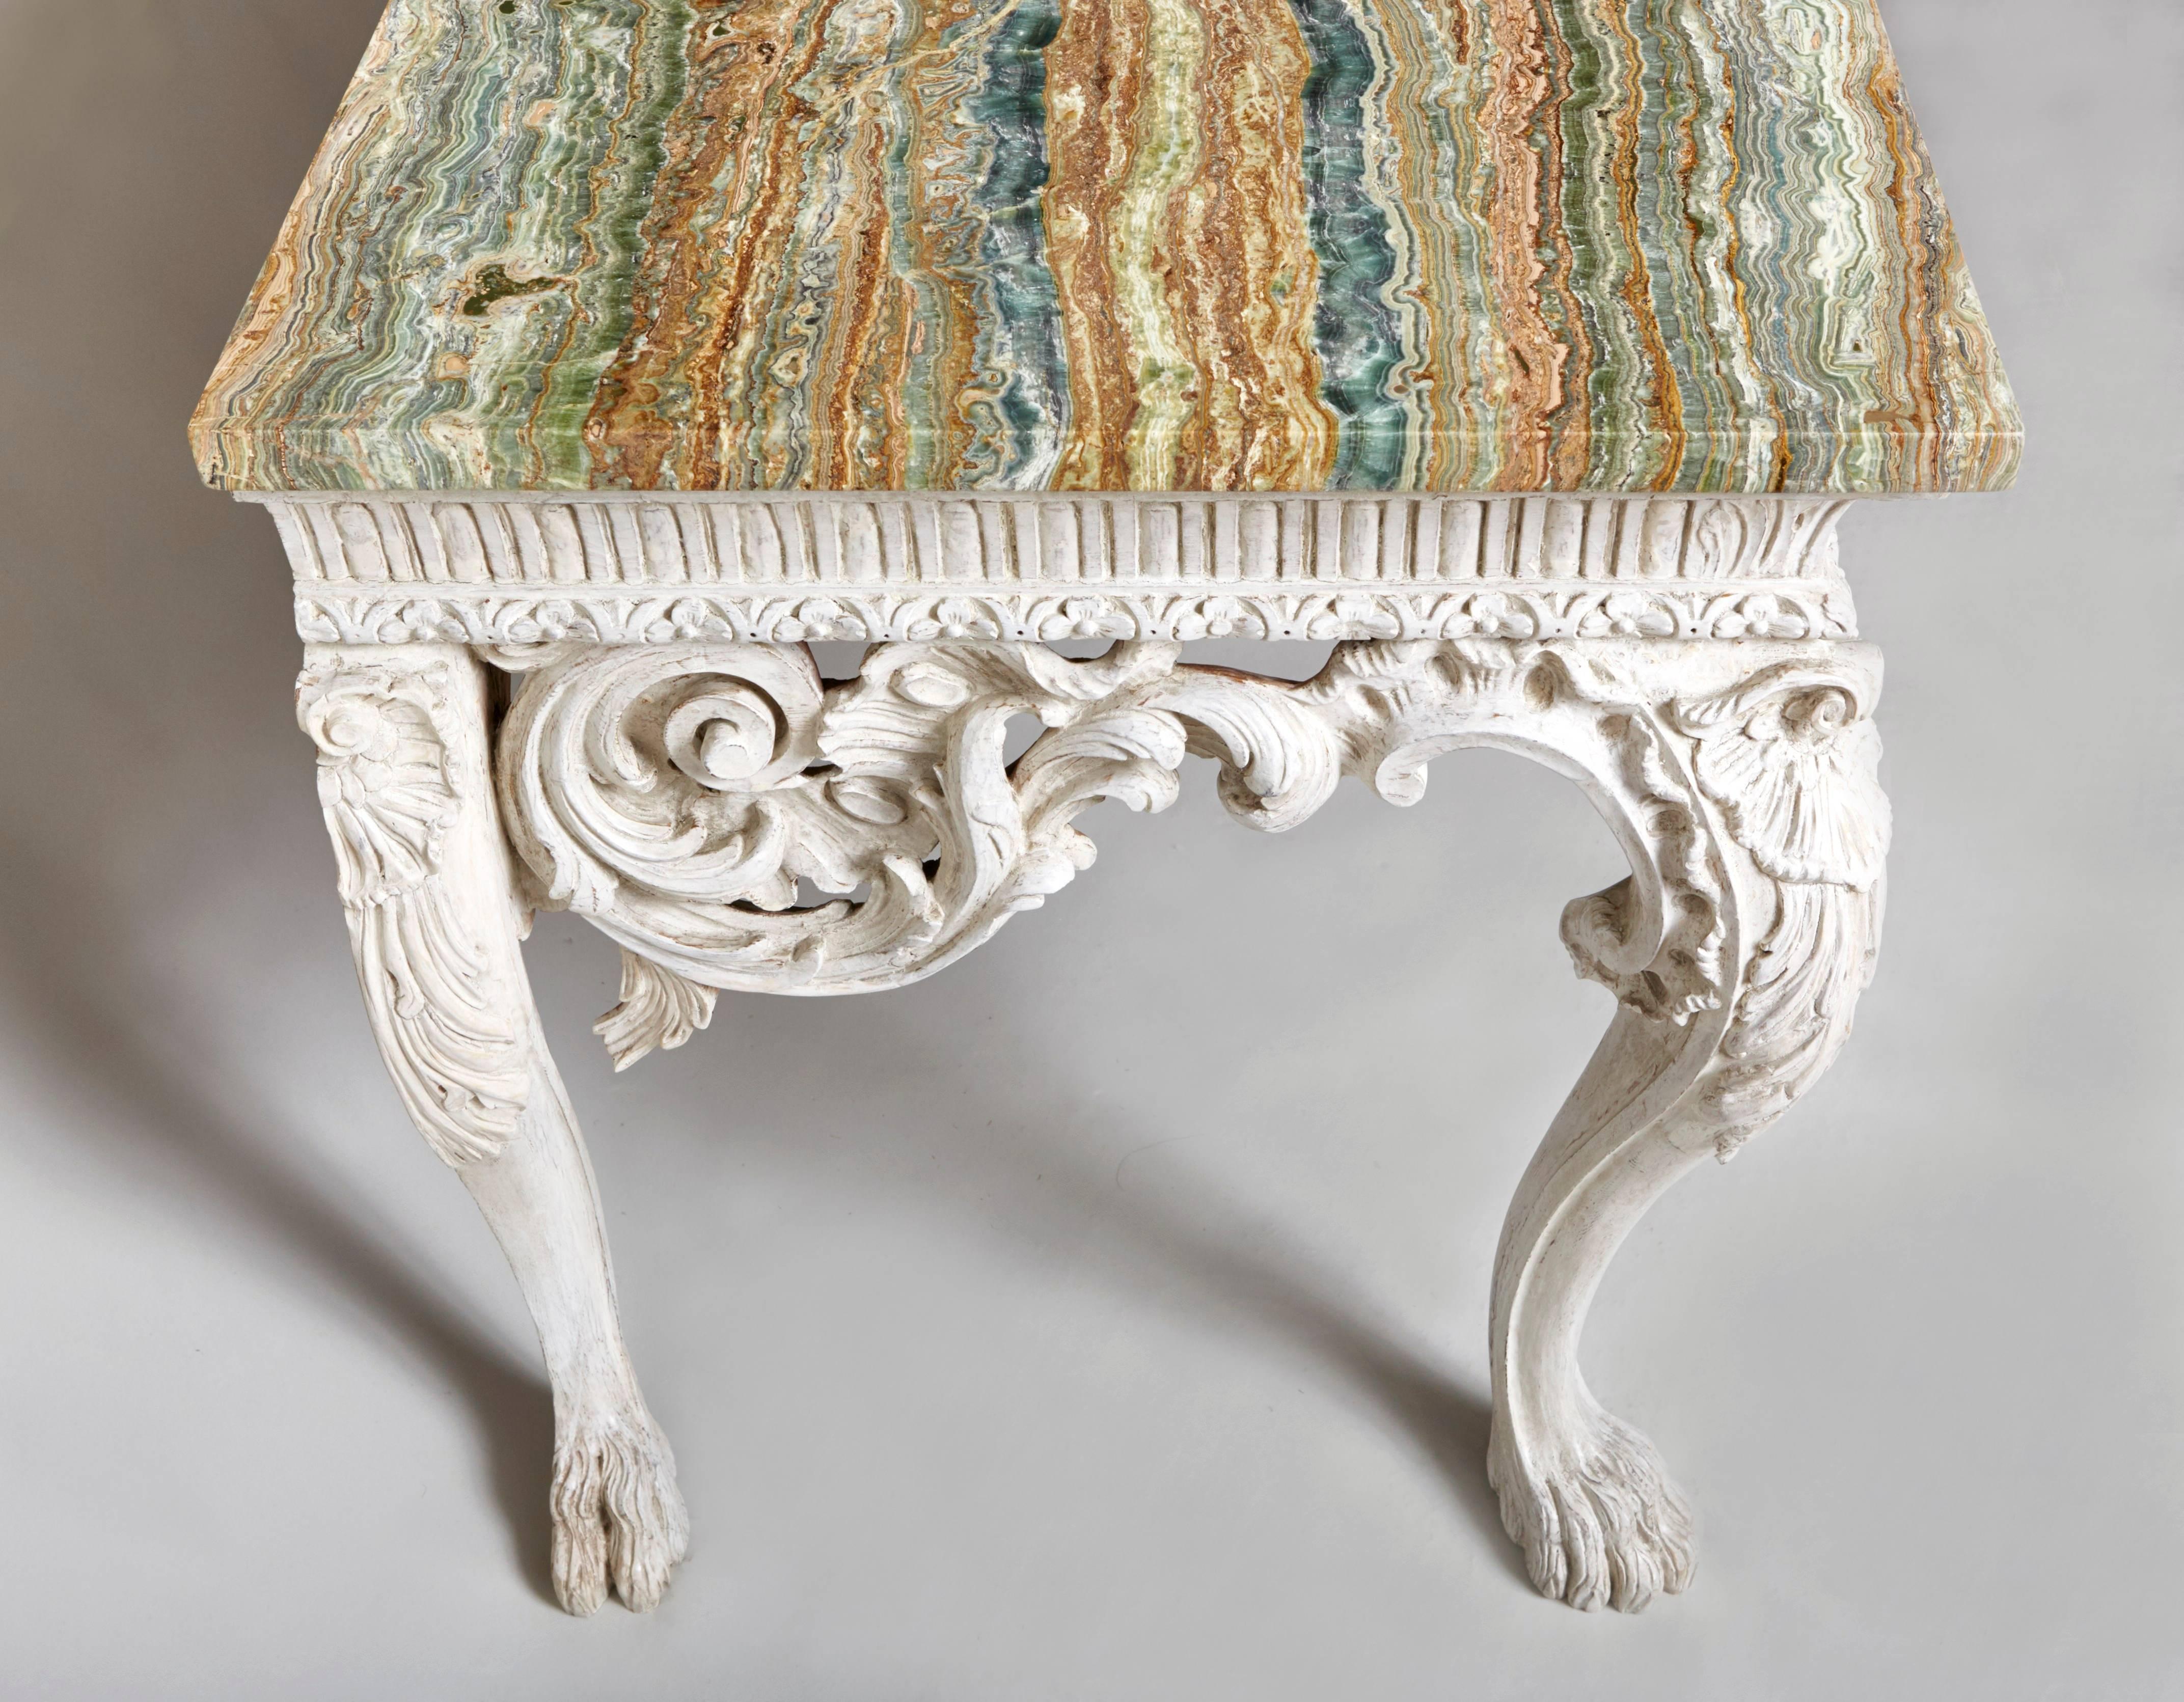 19th Century White Console Table with Green-Veined Onyx Top